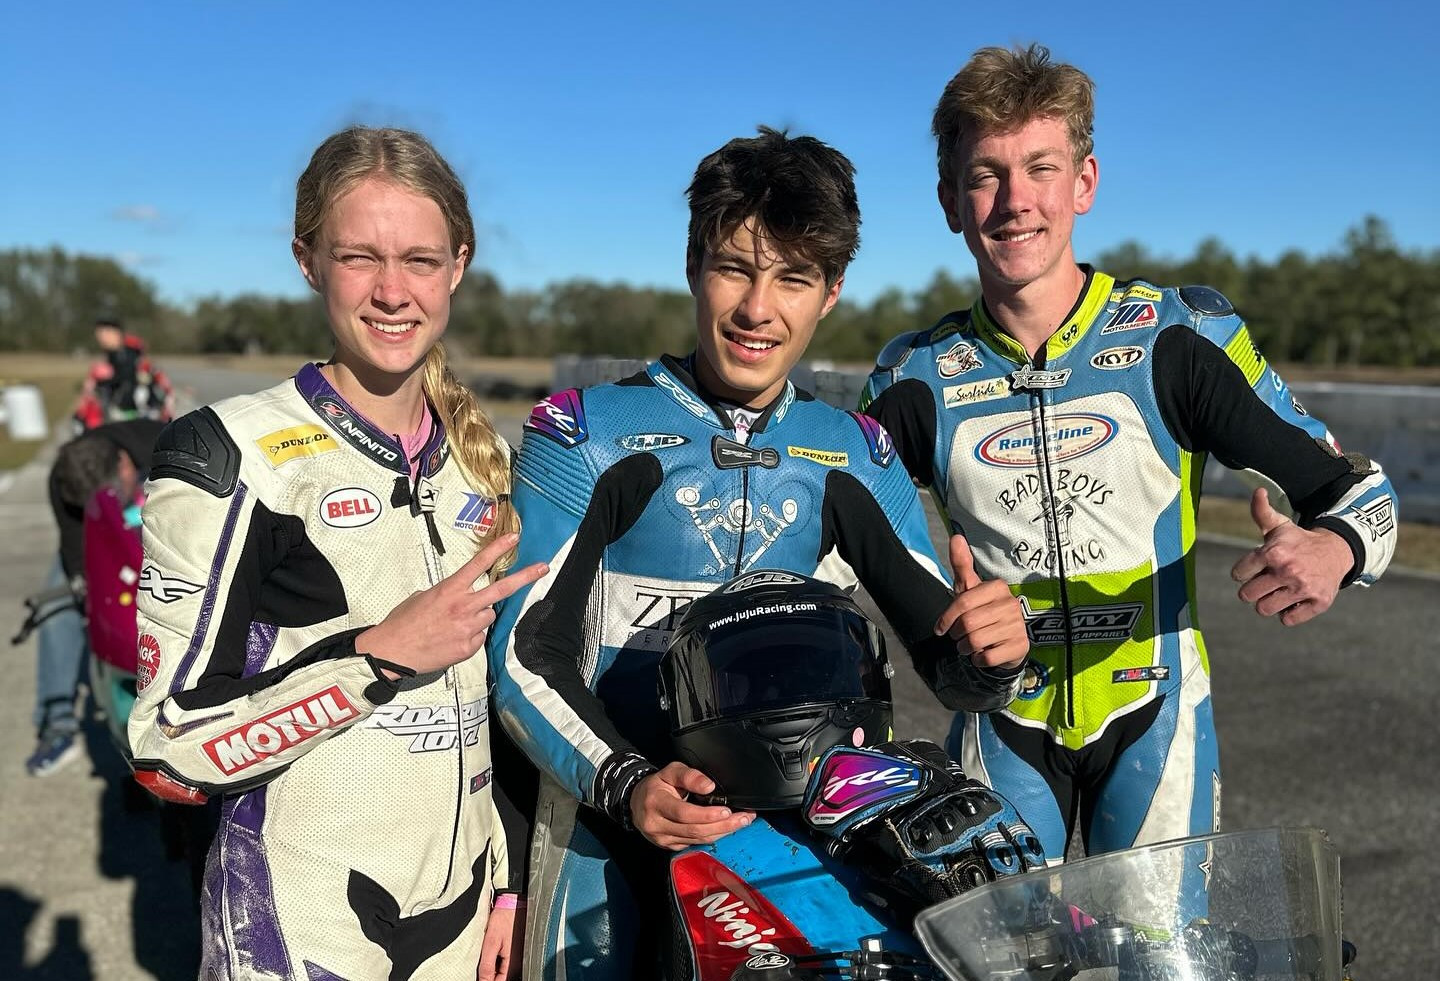 2023 MotoAmerica Junior Cup Champion Avery Dreher (right, age 17), 15-year-old British Talent Cup racer Julian Correa (center), and Dreher's 13-year-old sister Ella (left) took first place overall and in the 400 Super Stock class at the Ceparano Endurance Classic. Photo courtesy Bad Boy Racing.